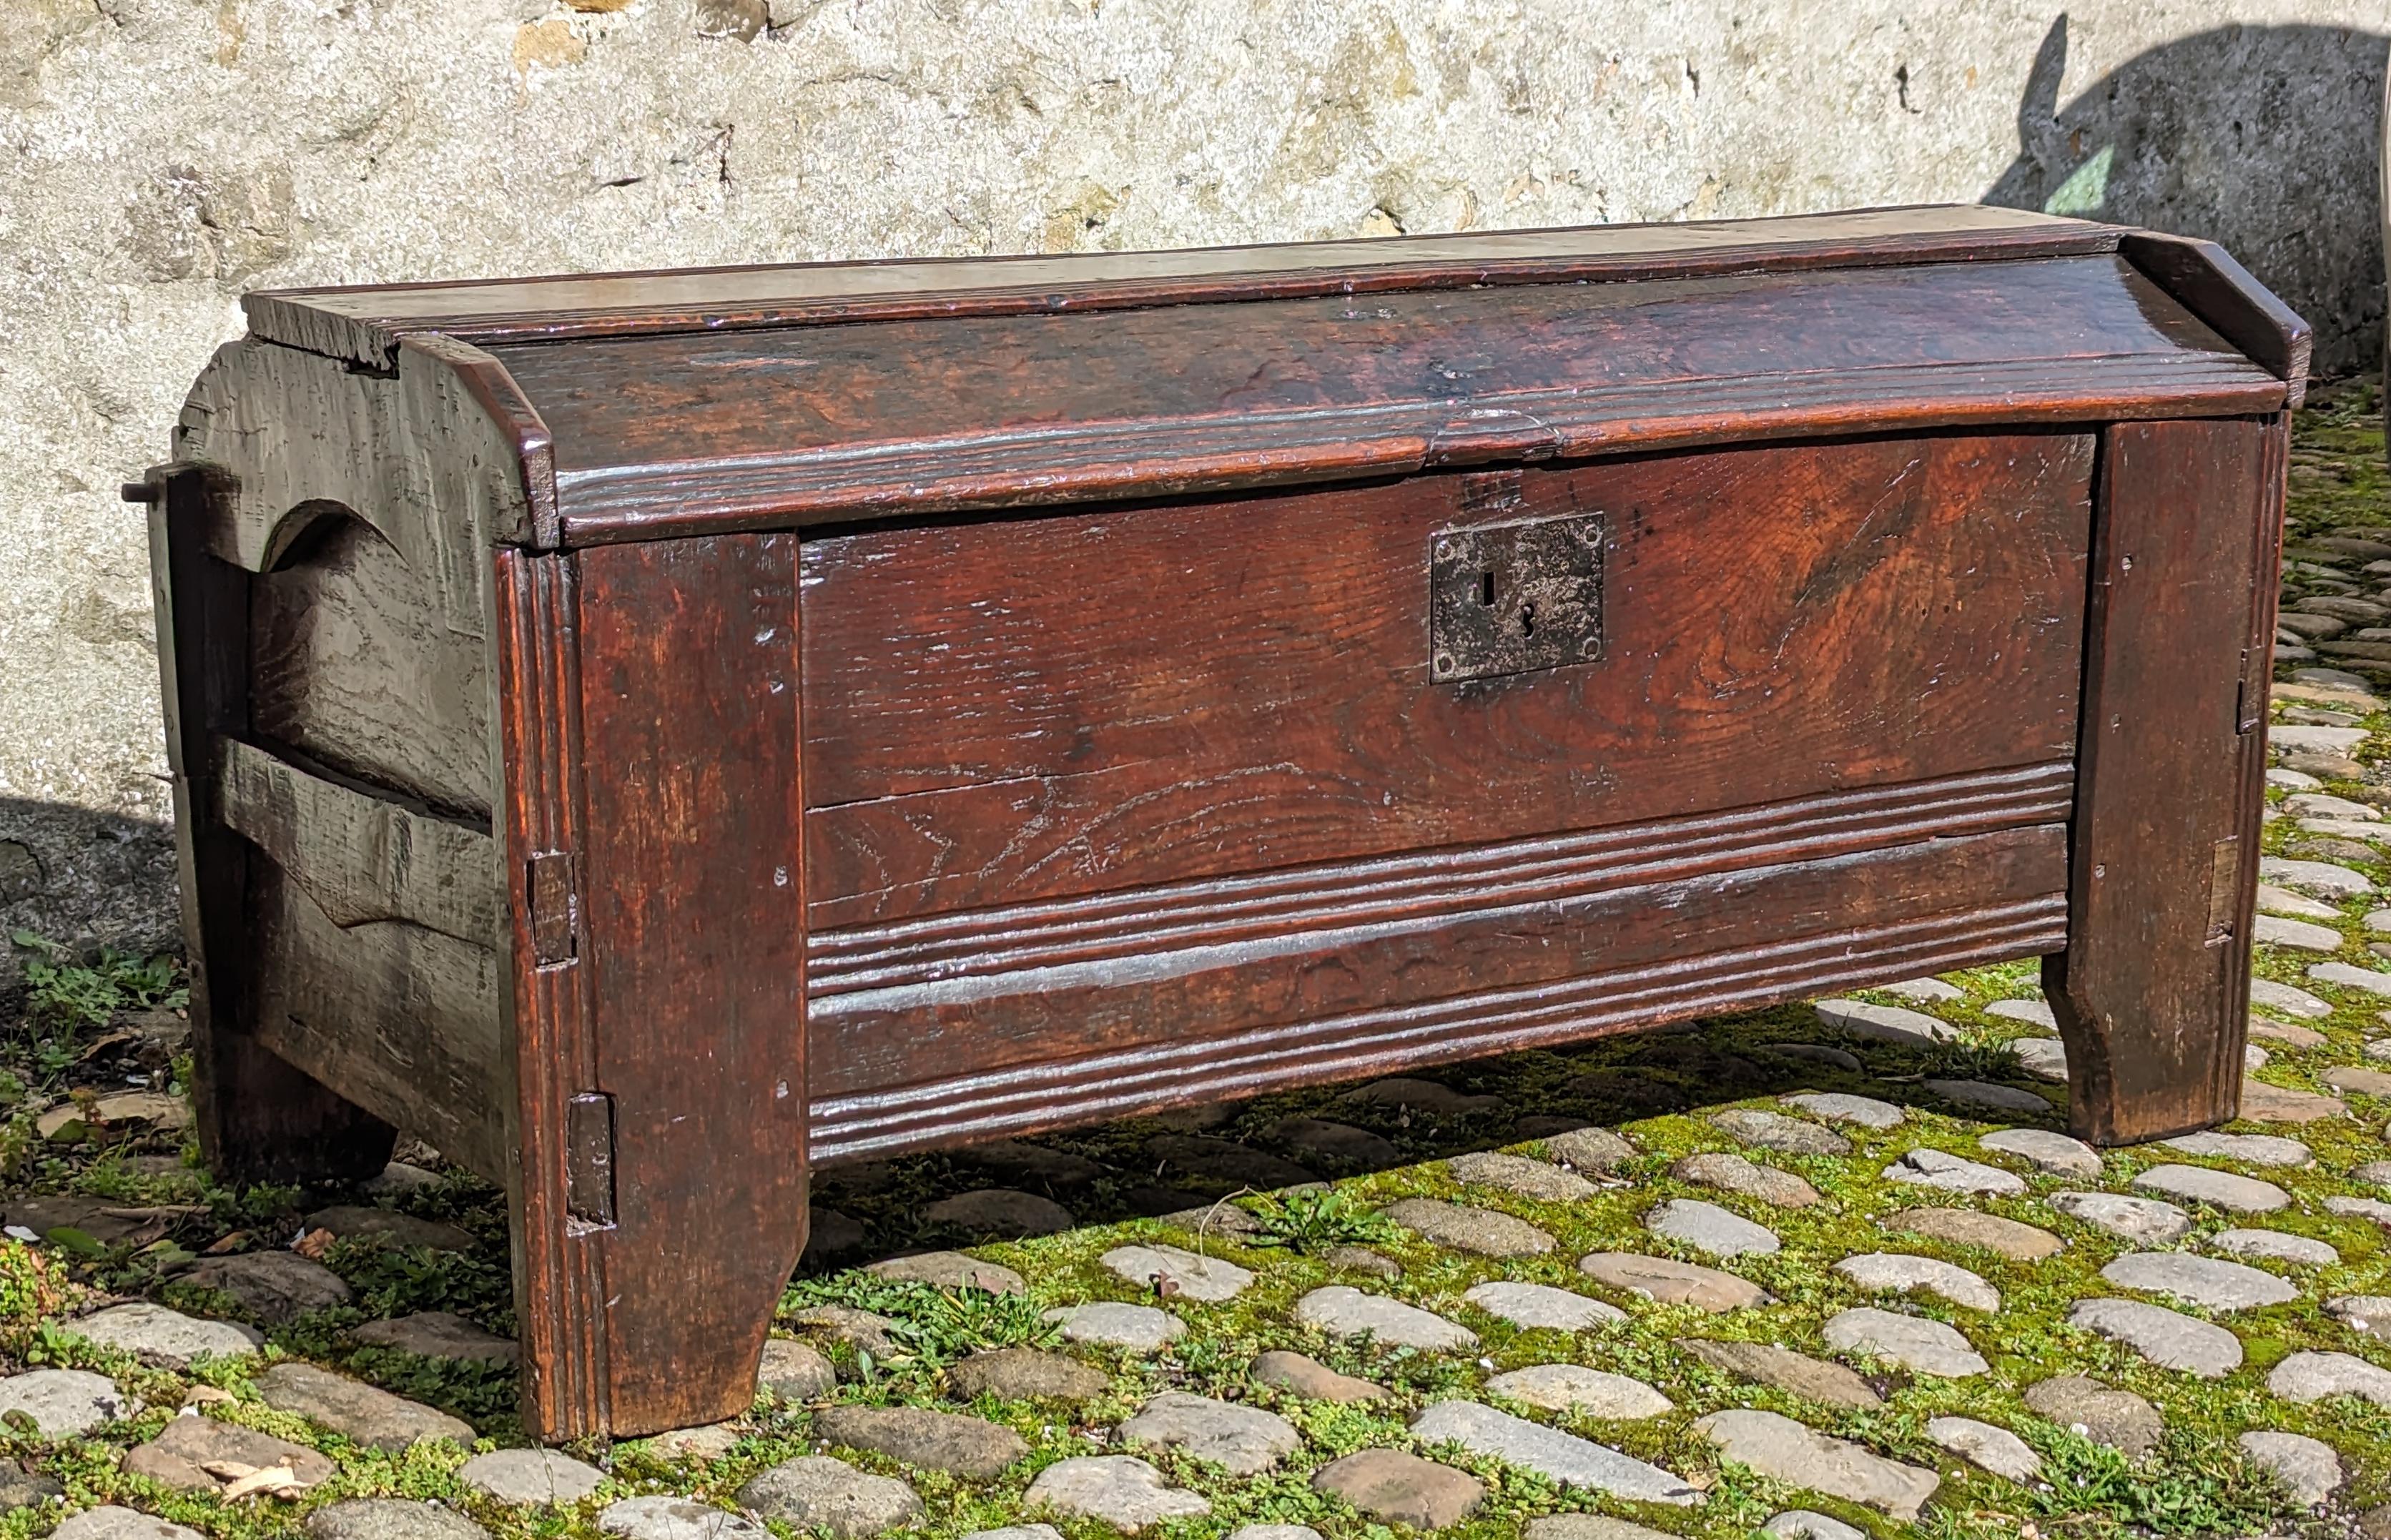 A 16th century boarded oak clamp-front meal chest or ark, Welsh Borders, circa 1550
Having a typical dome-lid constructed using three overlapping boards wedged and tenoned into the upright and extended shaped-ends.
Fantastic colour and surface, good